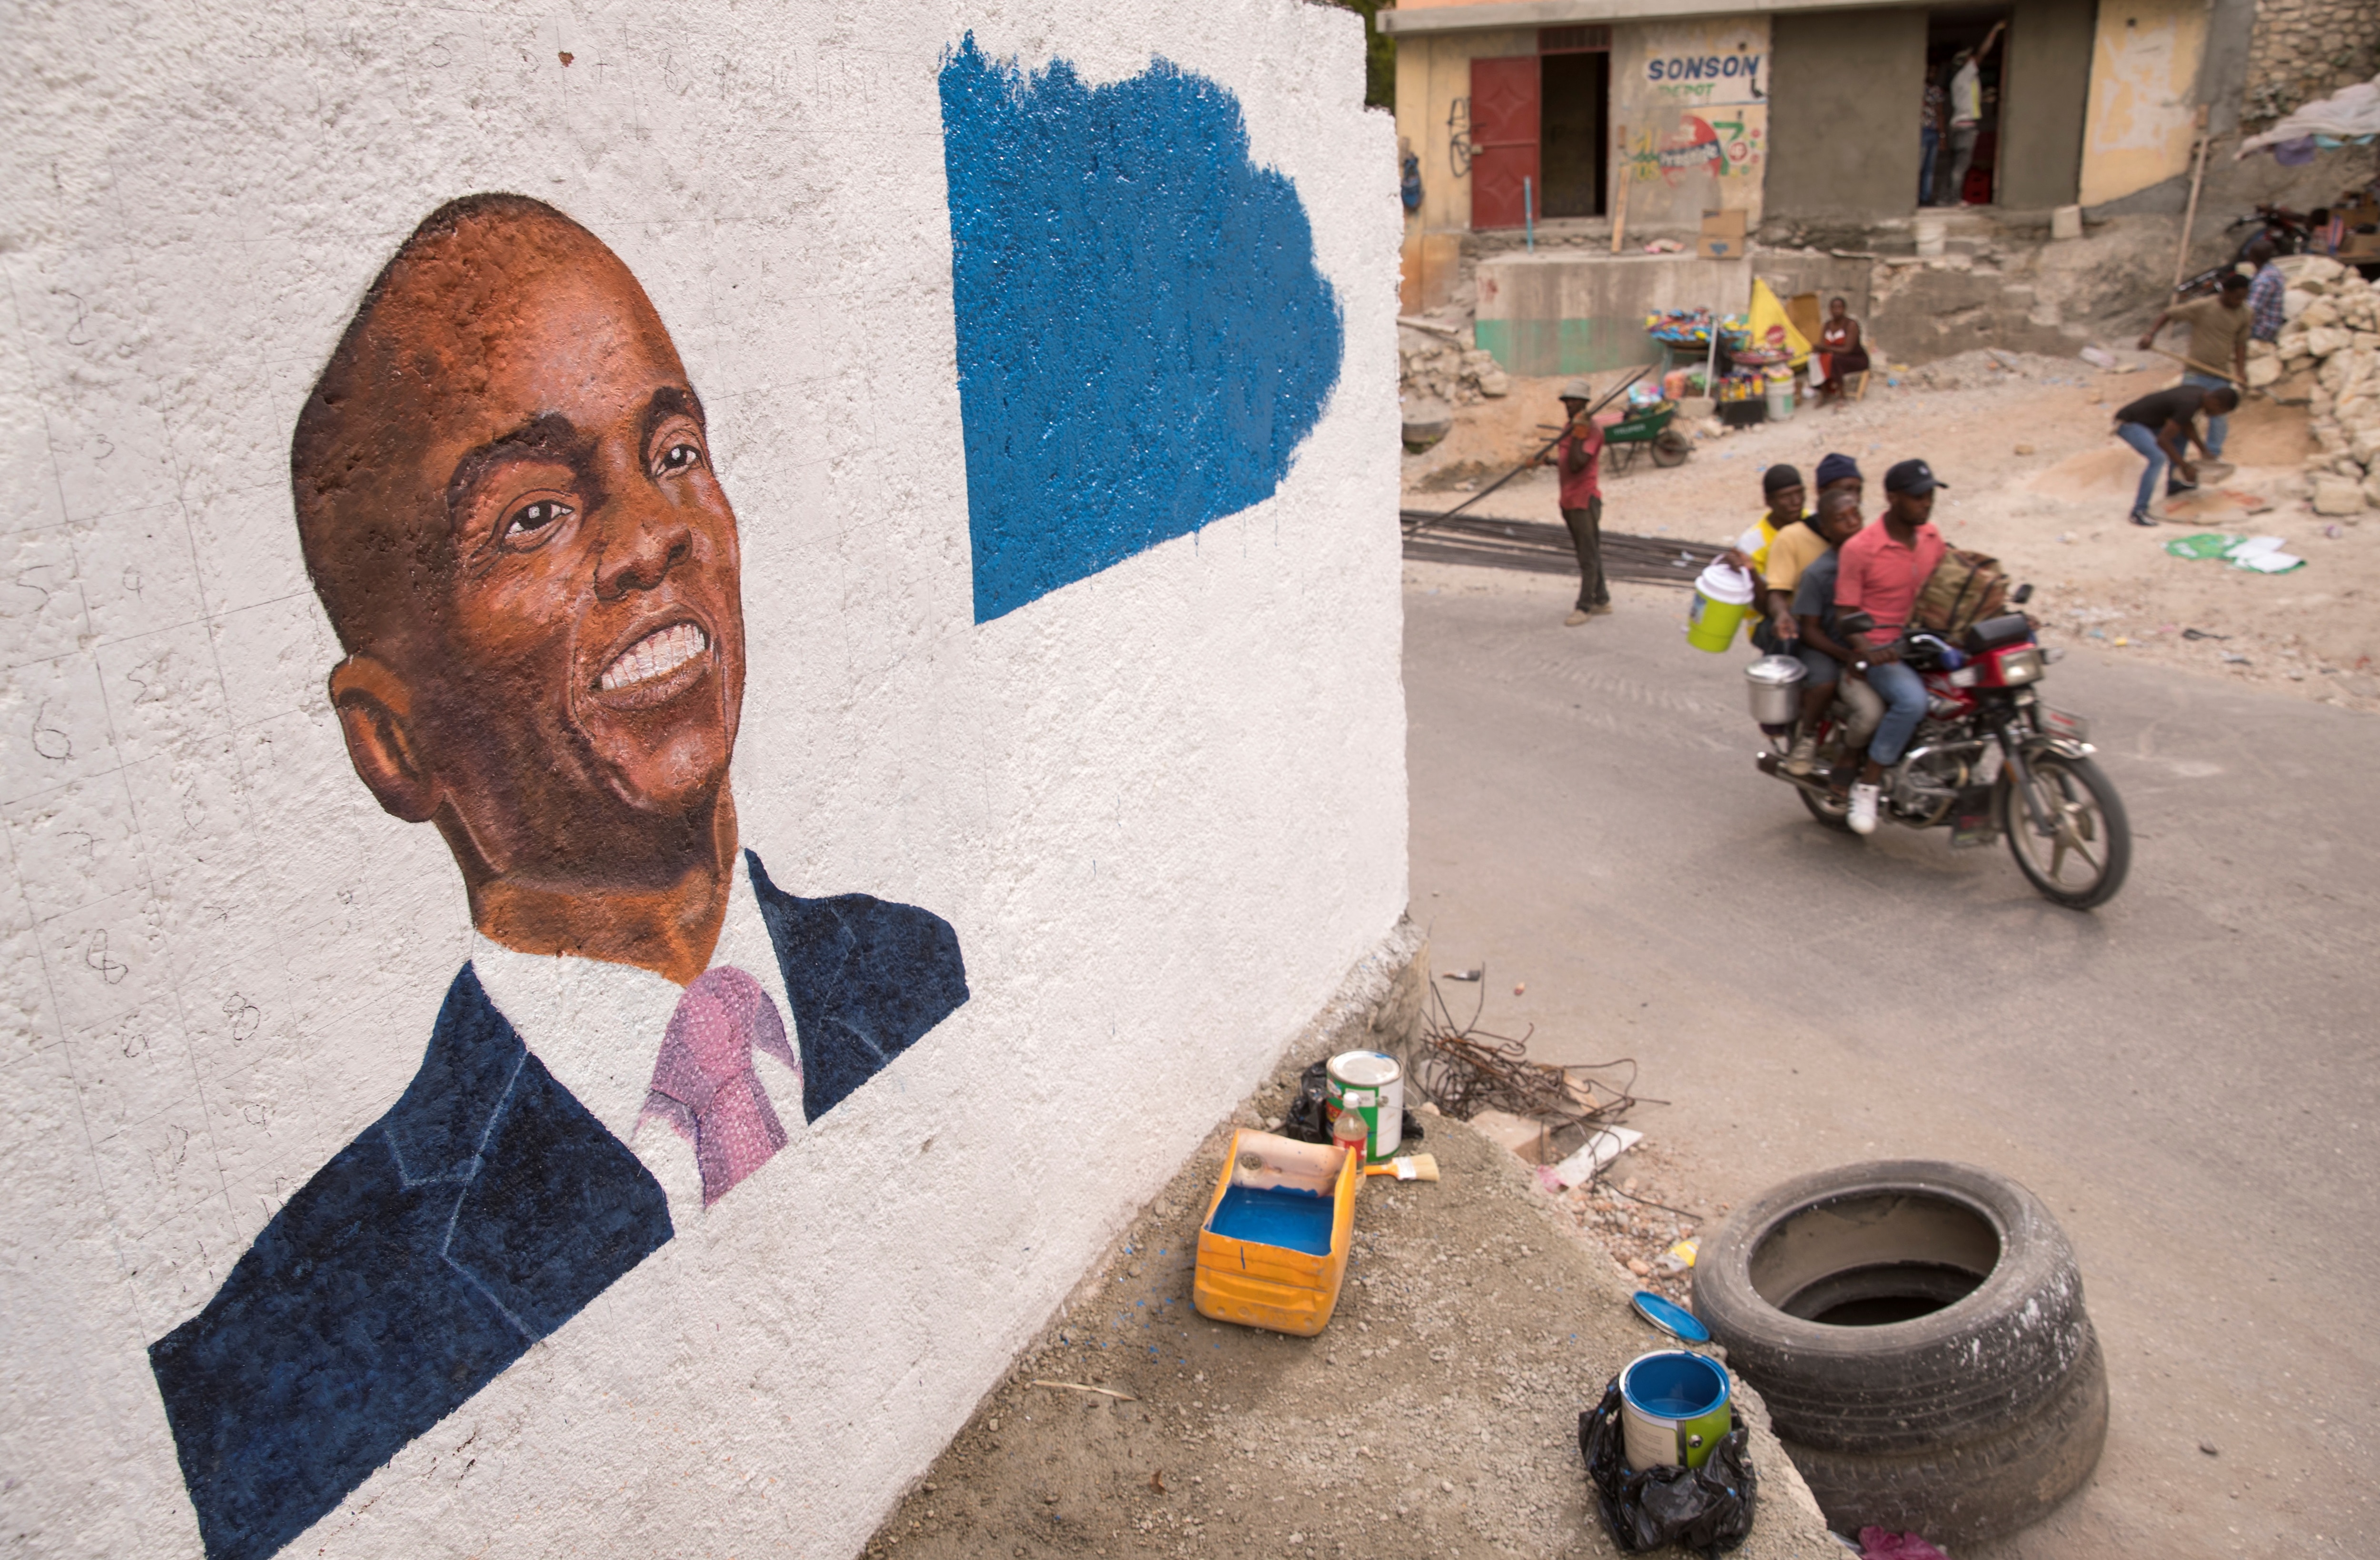 People pass by a mural in tribute to the assassinated President Jovenel Moise, in Port-au-Prince, Haiti.